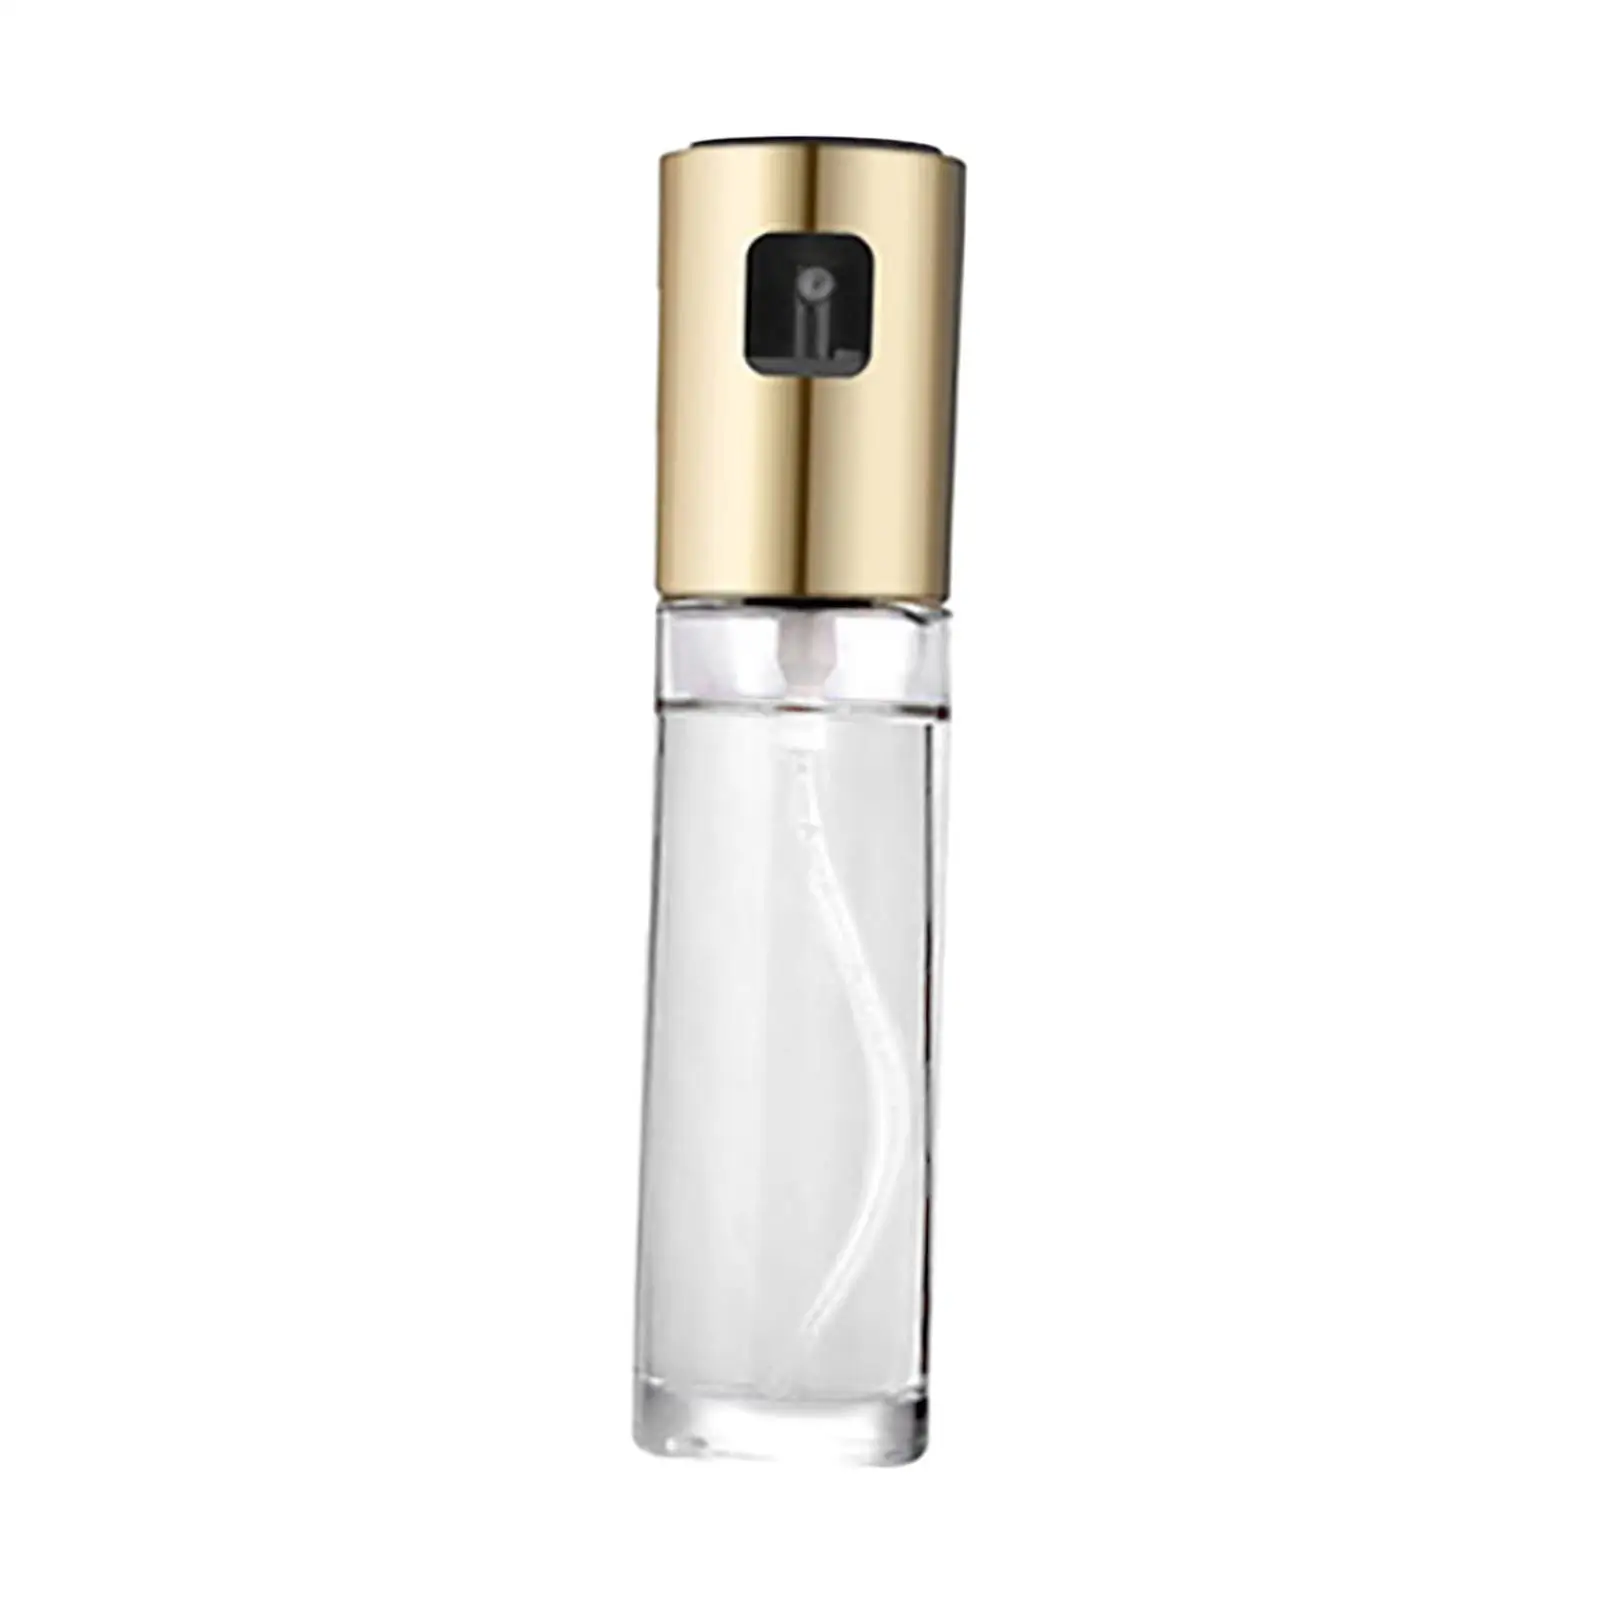 Olive Oil Sprayer Bottle Leakproof Empty Versatile Glass Oil Spray for Kitchen Accessories Frying Barbecue Air Fryer Baking